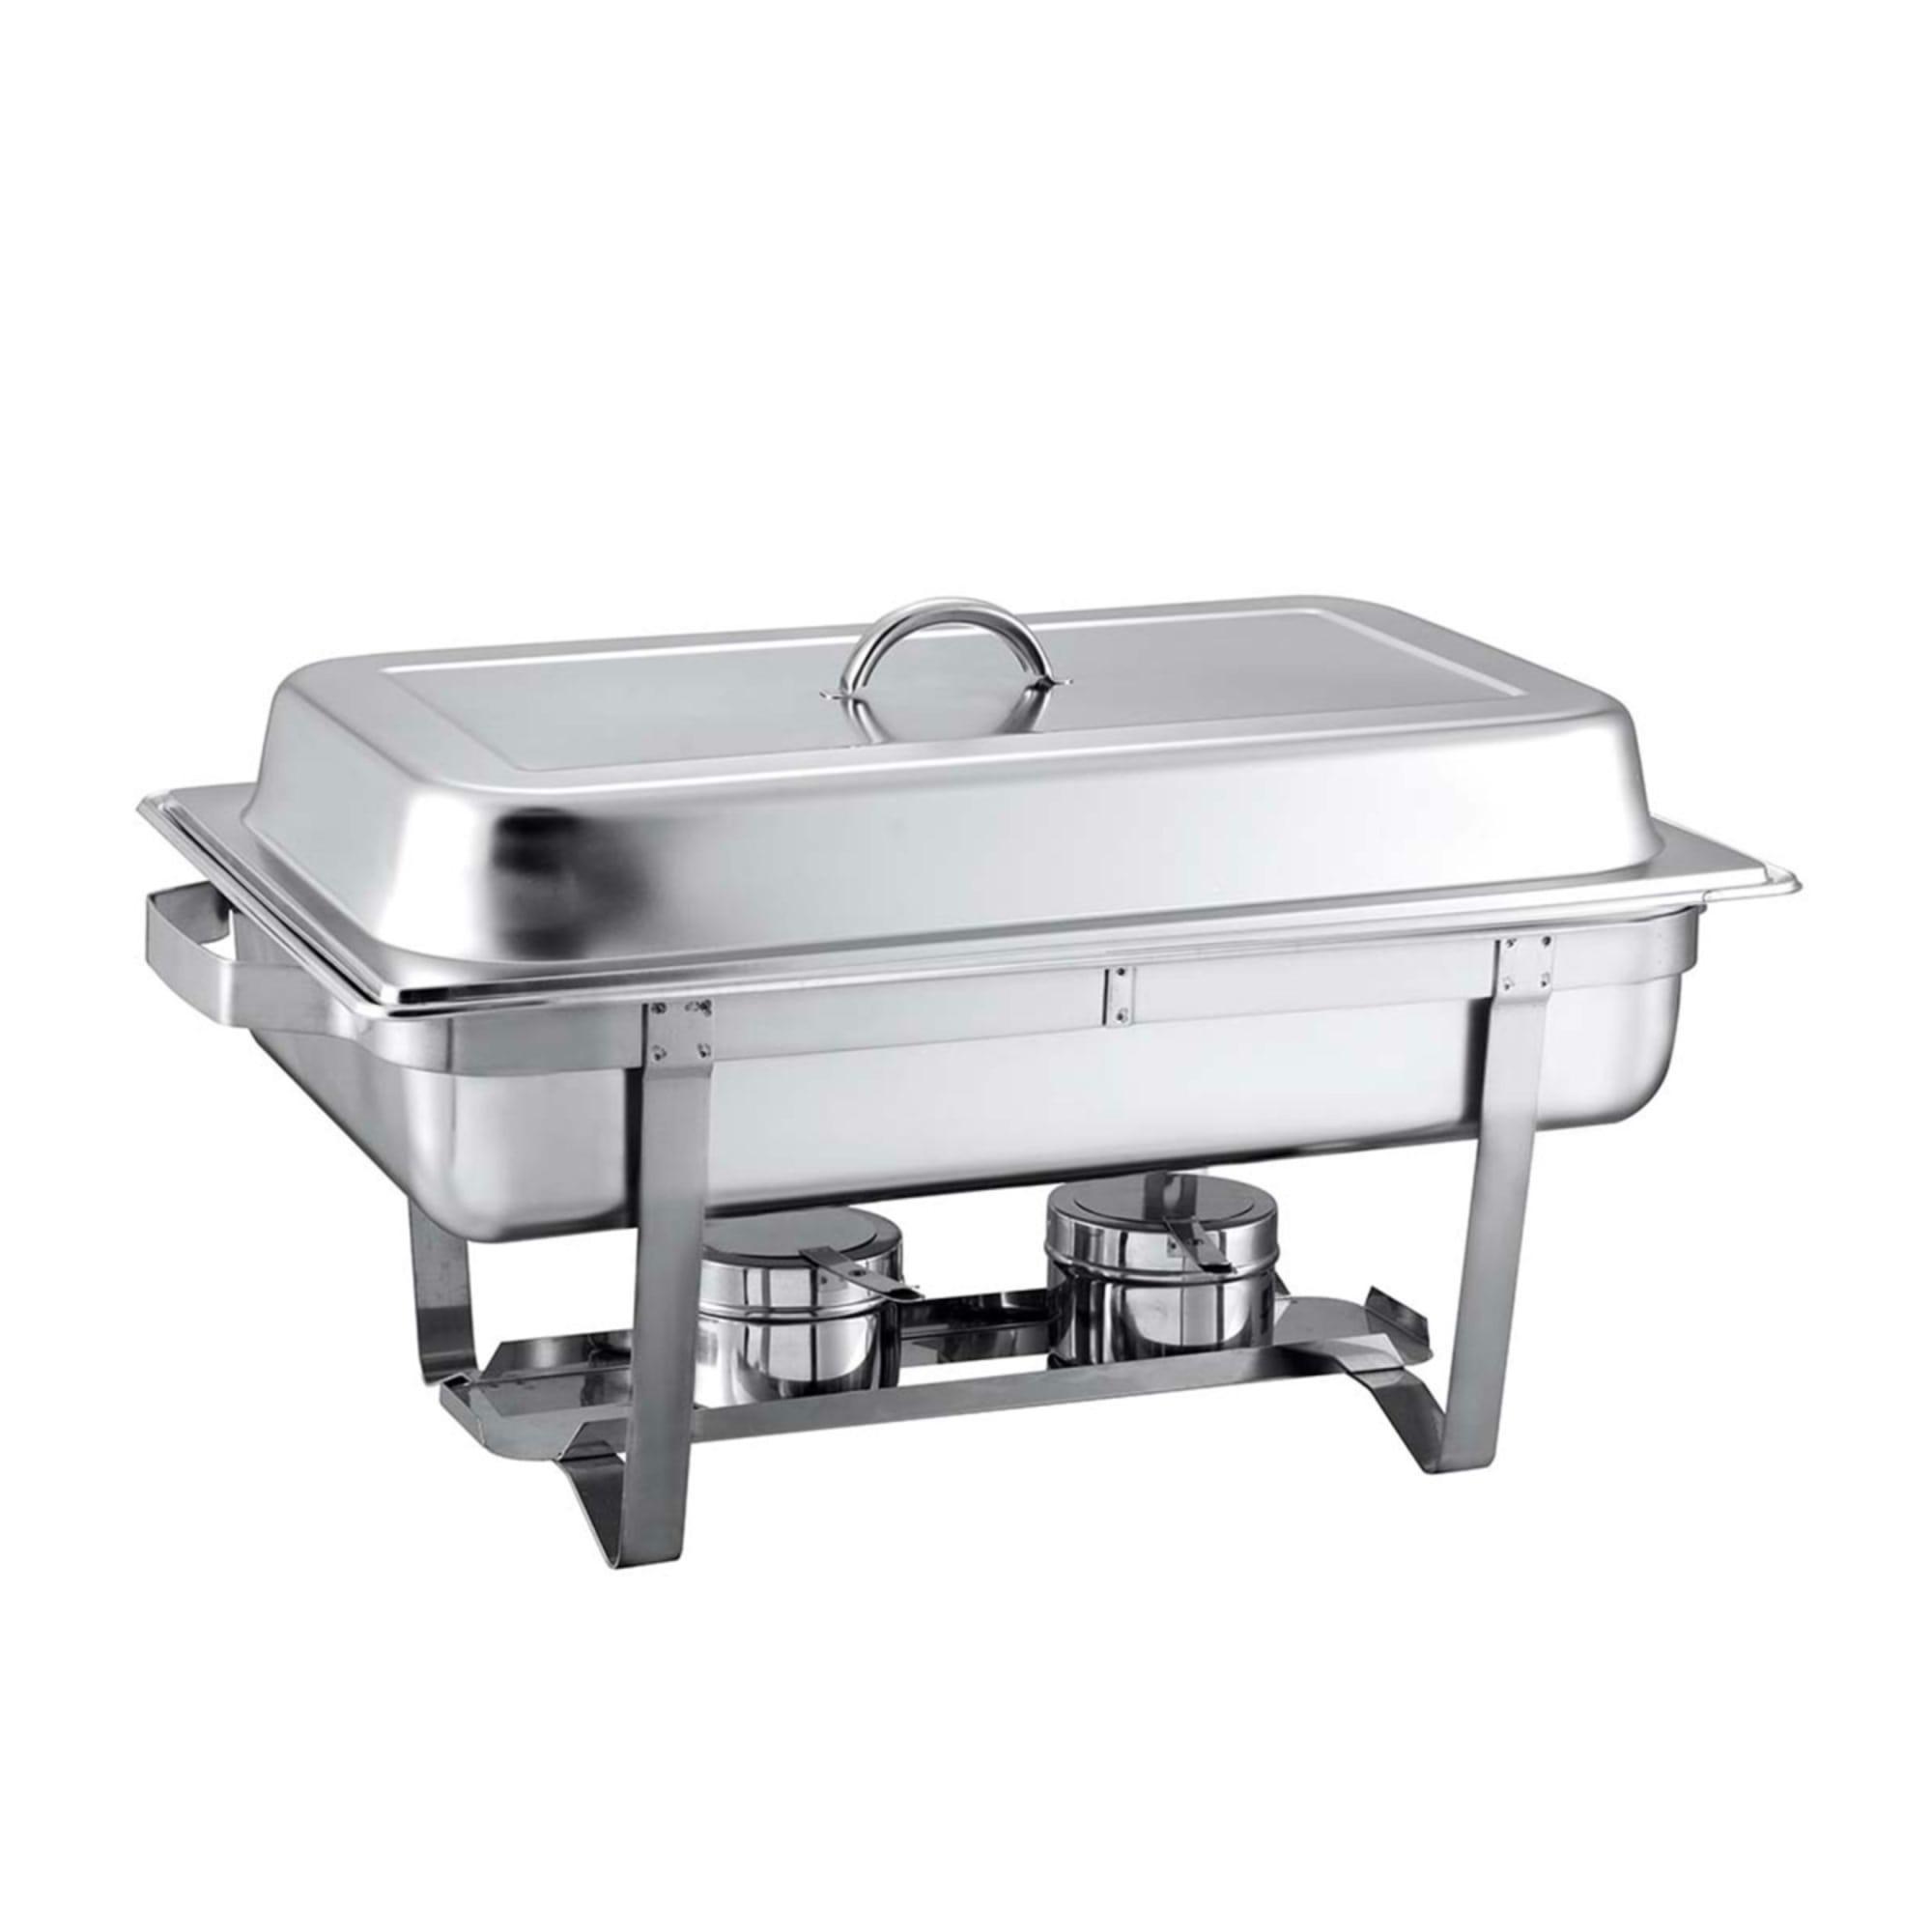 Soga Rectangular Stainless Steel Dual Tray Chafing Dish Set of 2 Image 3